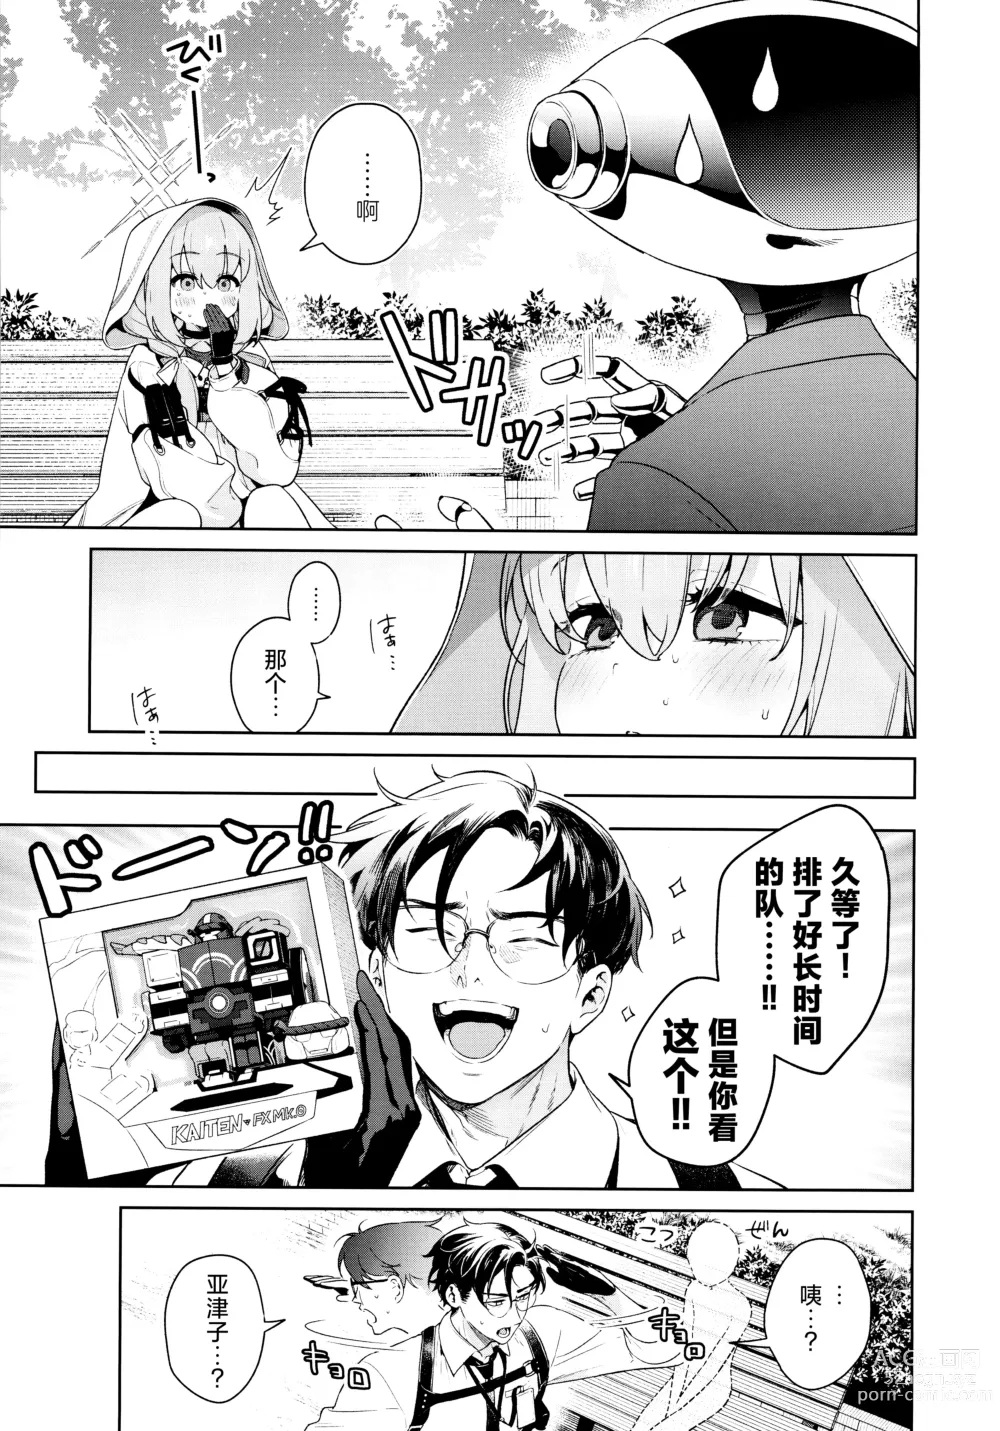 Page 5 of doujinshi 请教(管)教我